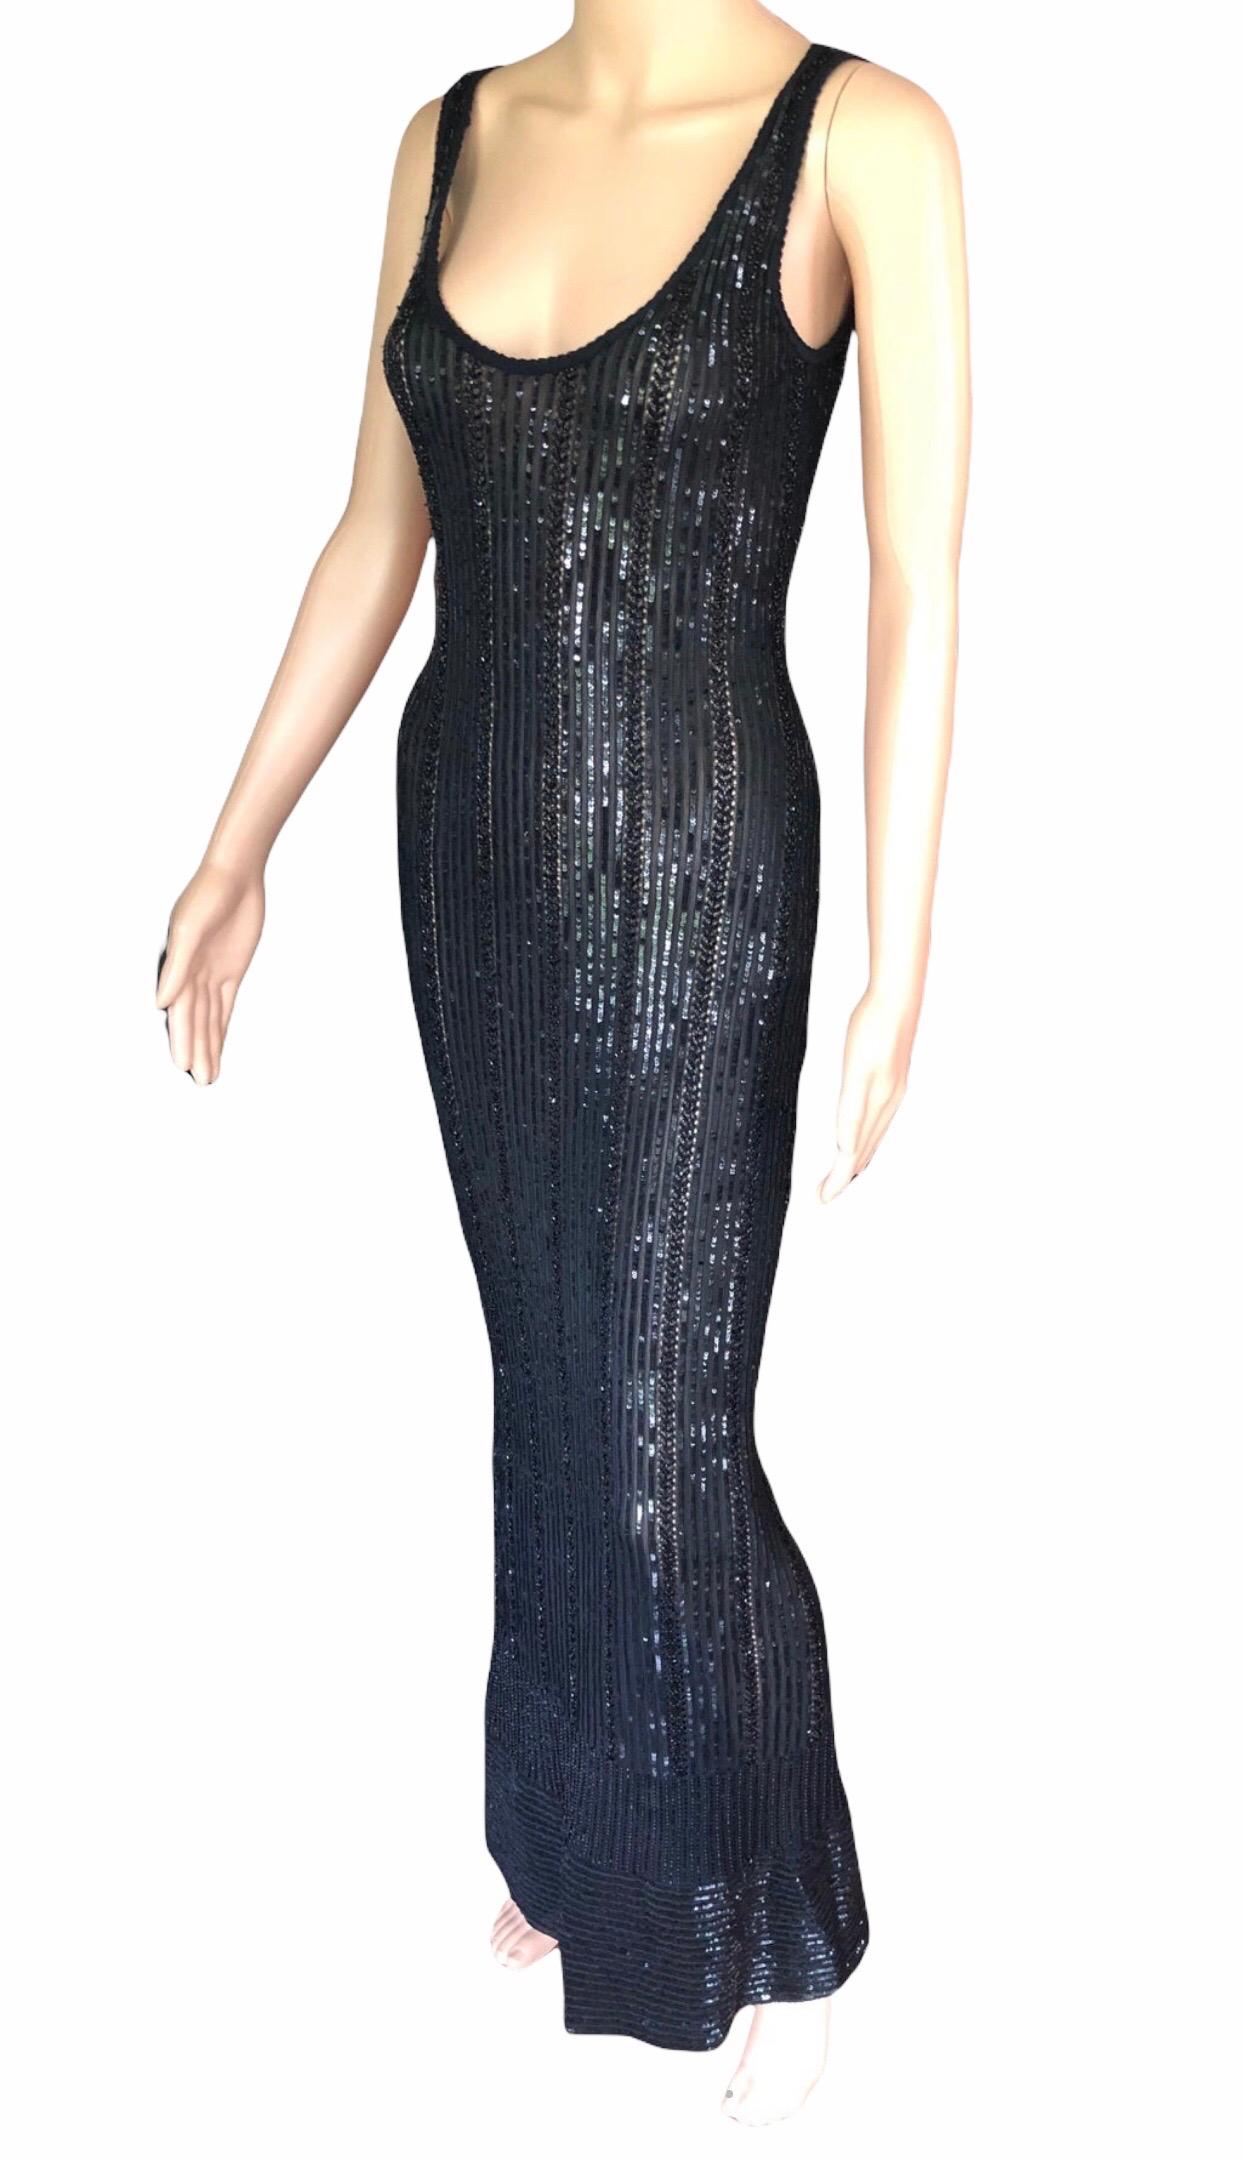 Women's Azzedine Alaia Vintage S/S 1996 Runway Black Sequin Embellished Dress Gown For Sale